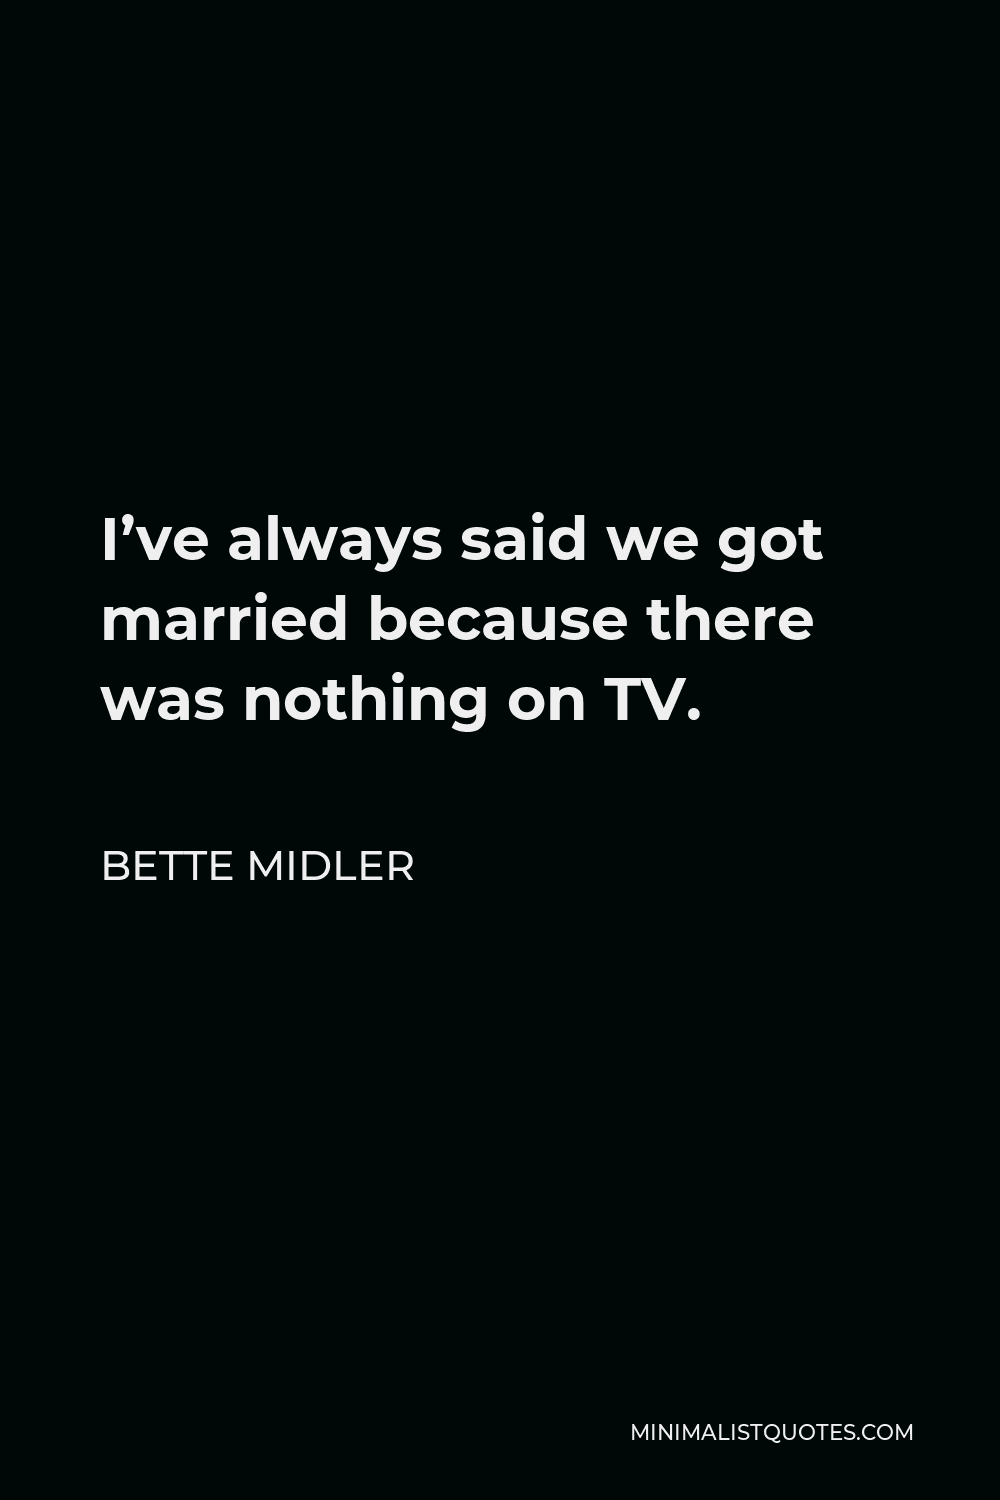 Bette Midler Quote - I’ve always said we got married because there was nothing on TV.